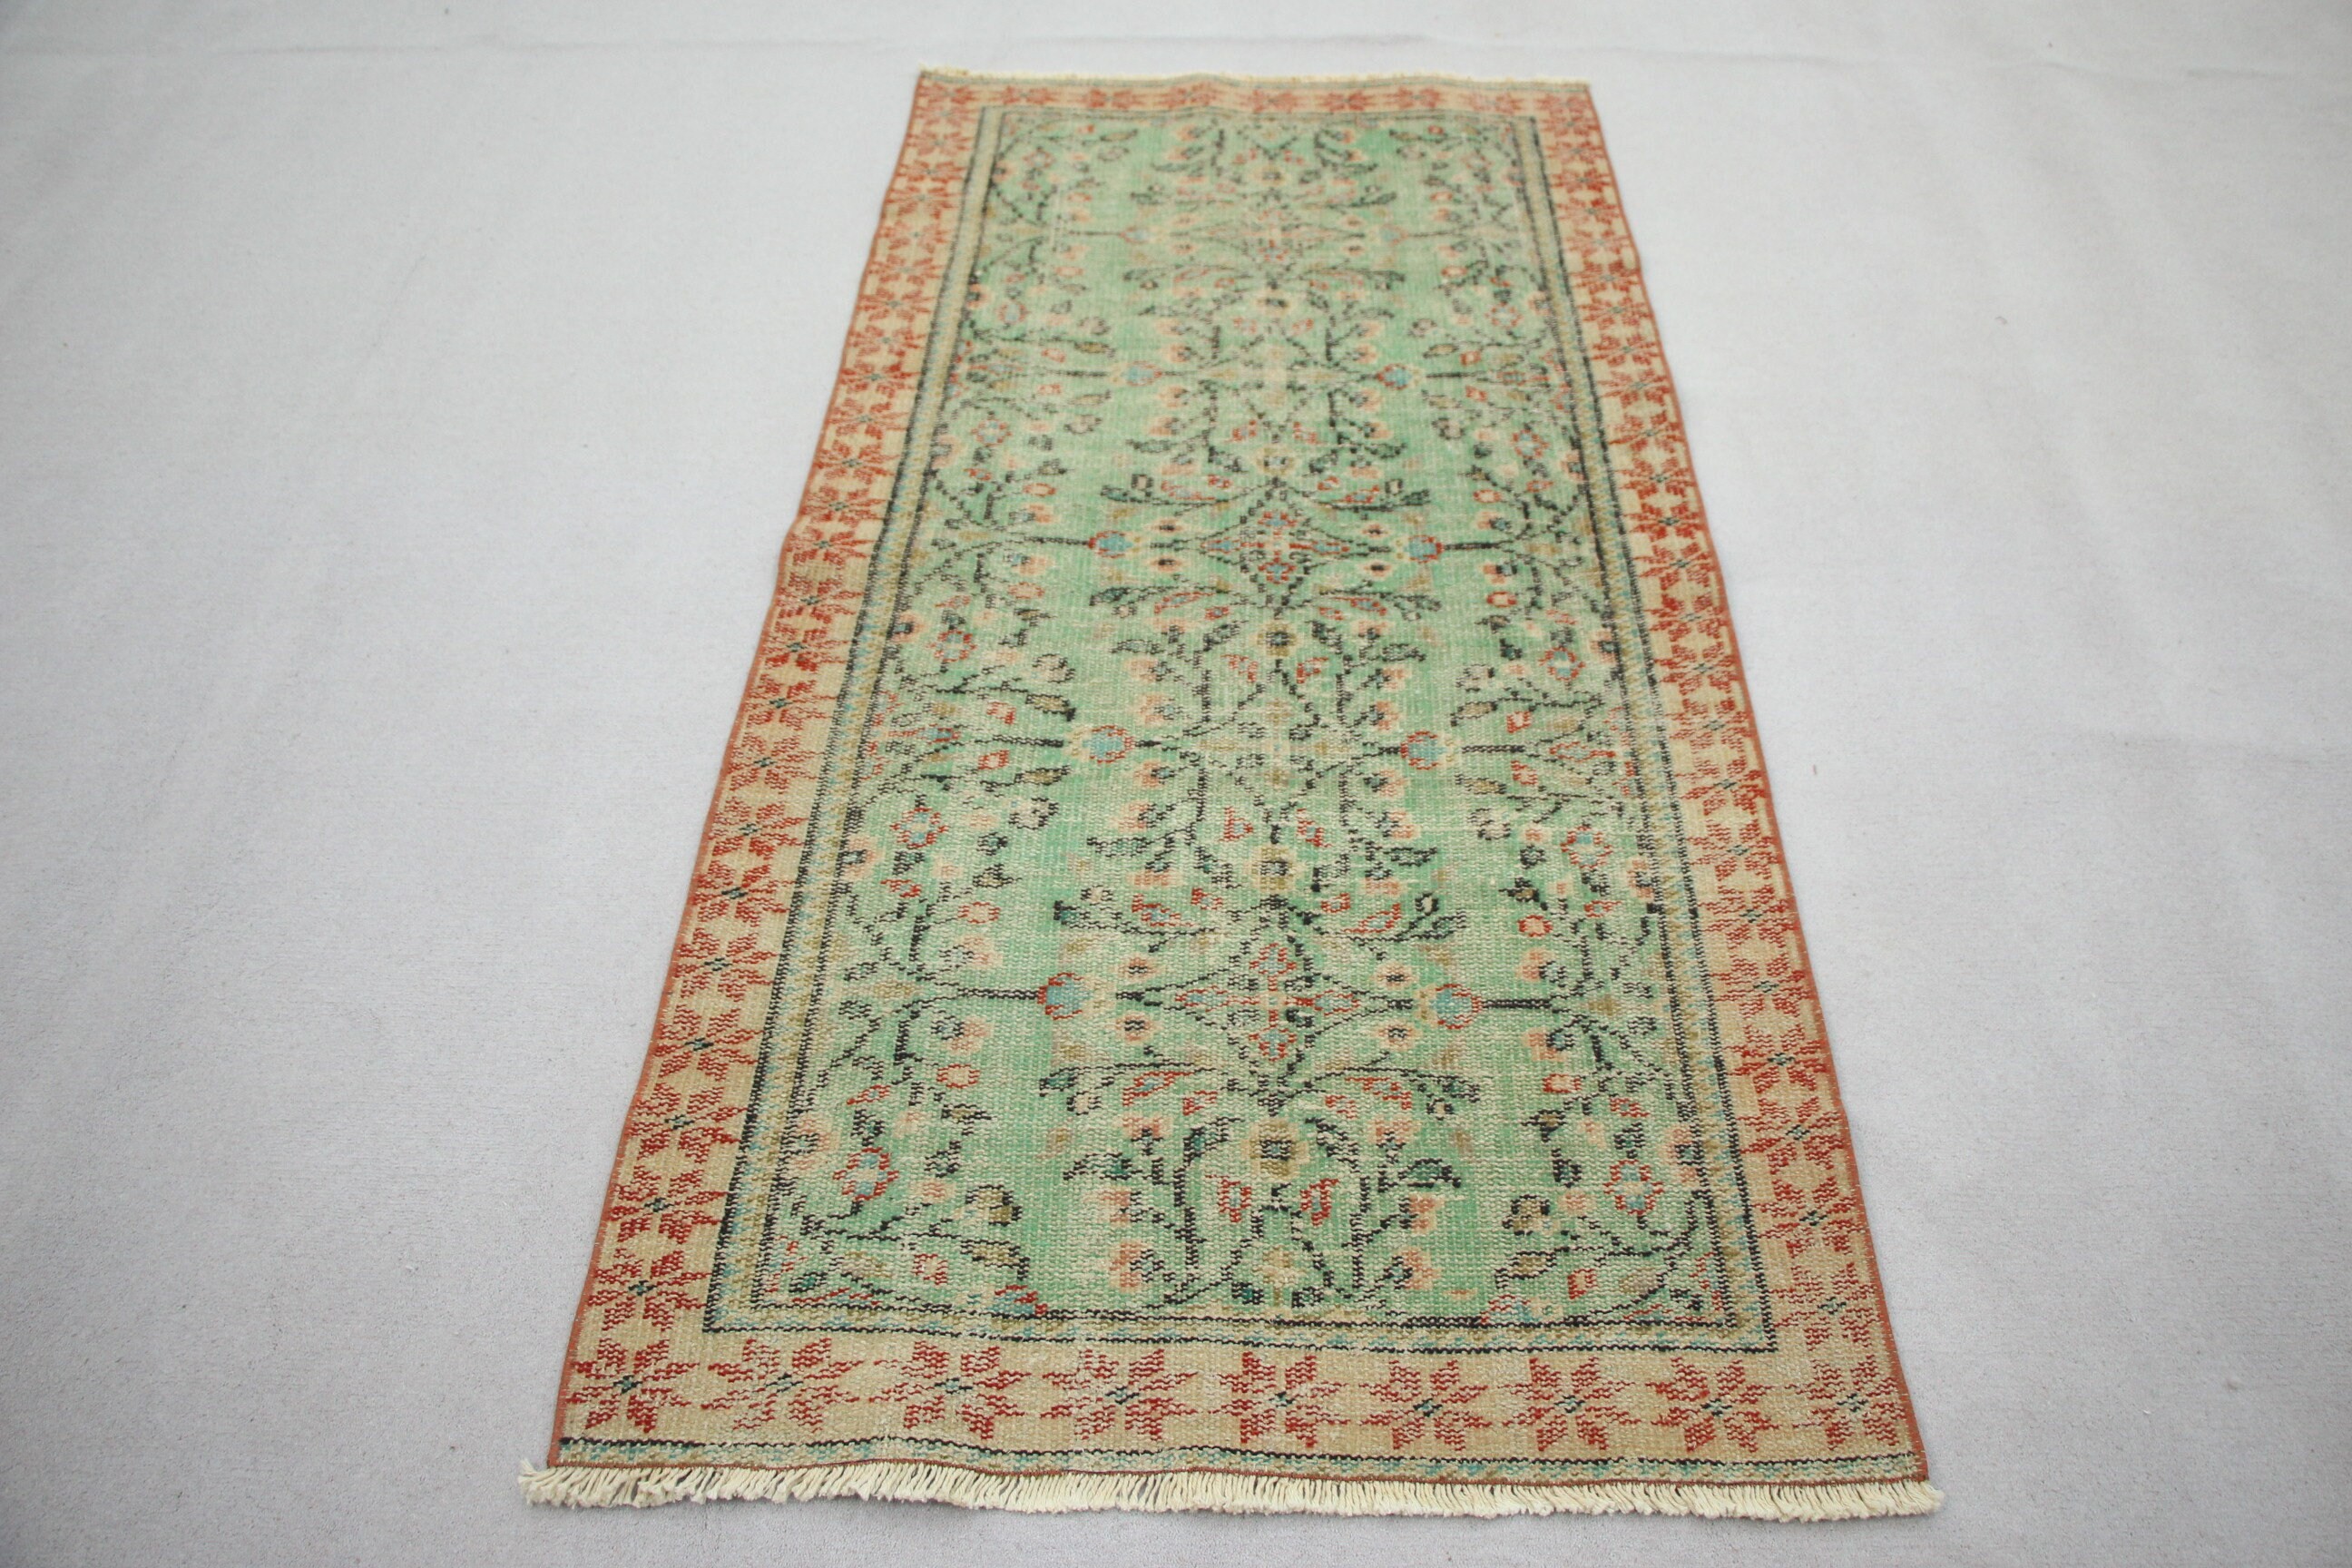 Entry Rug, Anatolian Rug, 3.1x6.4 ft Accent Rugs, Distressed Rug, Turkish Rug, Kitchen Rug, Vintage Rugs, Home Decor Rugs, Green Floor Rug